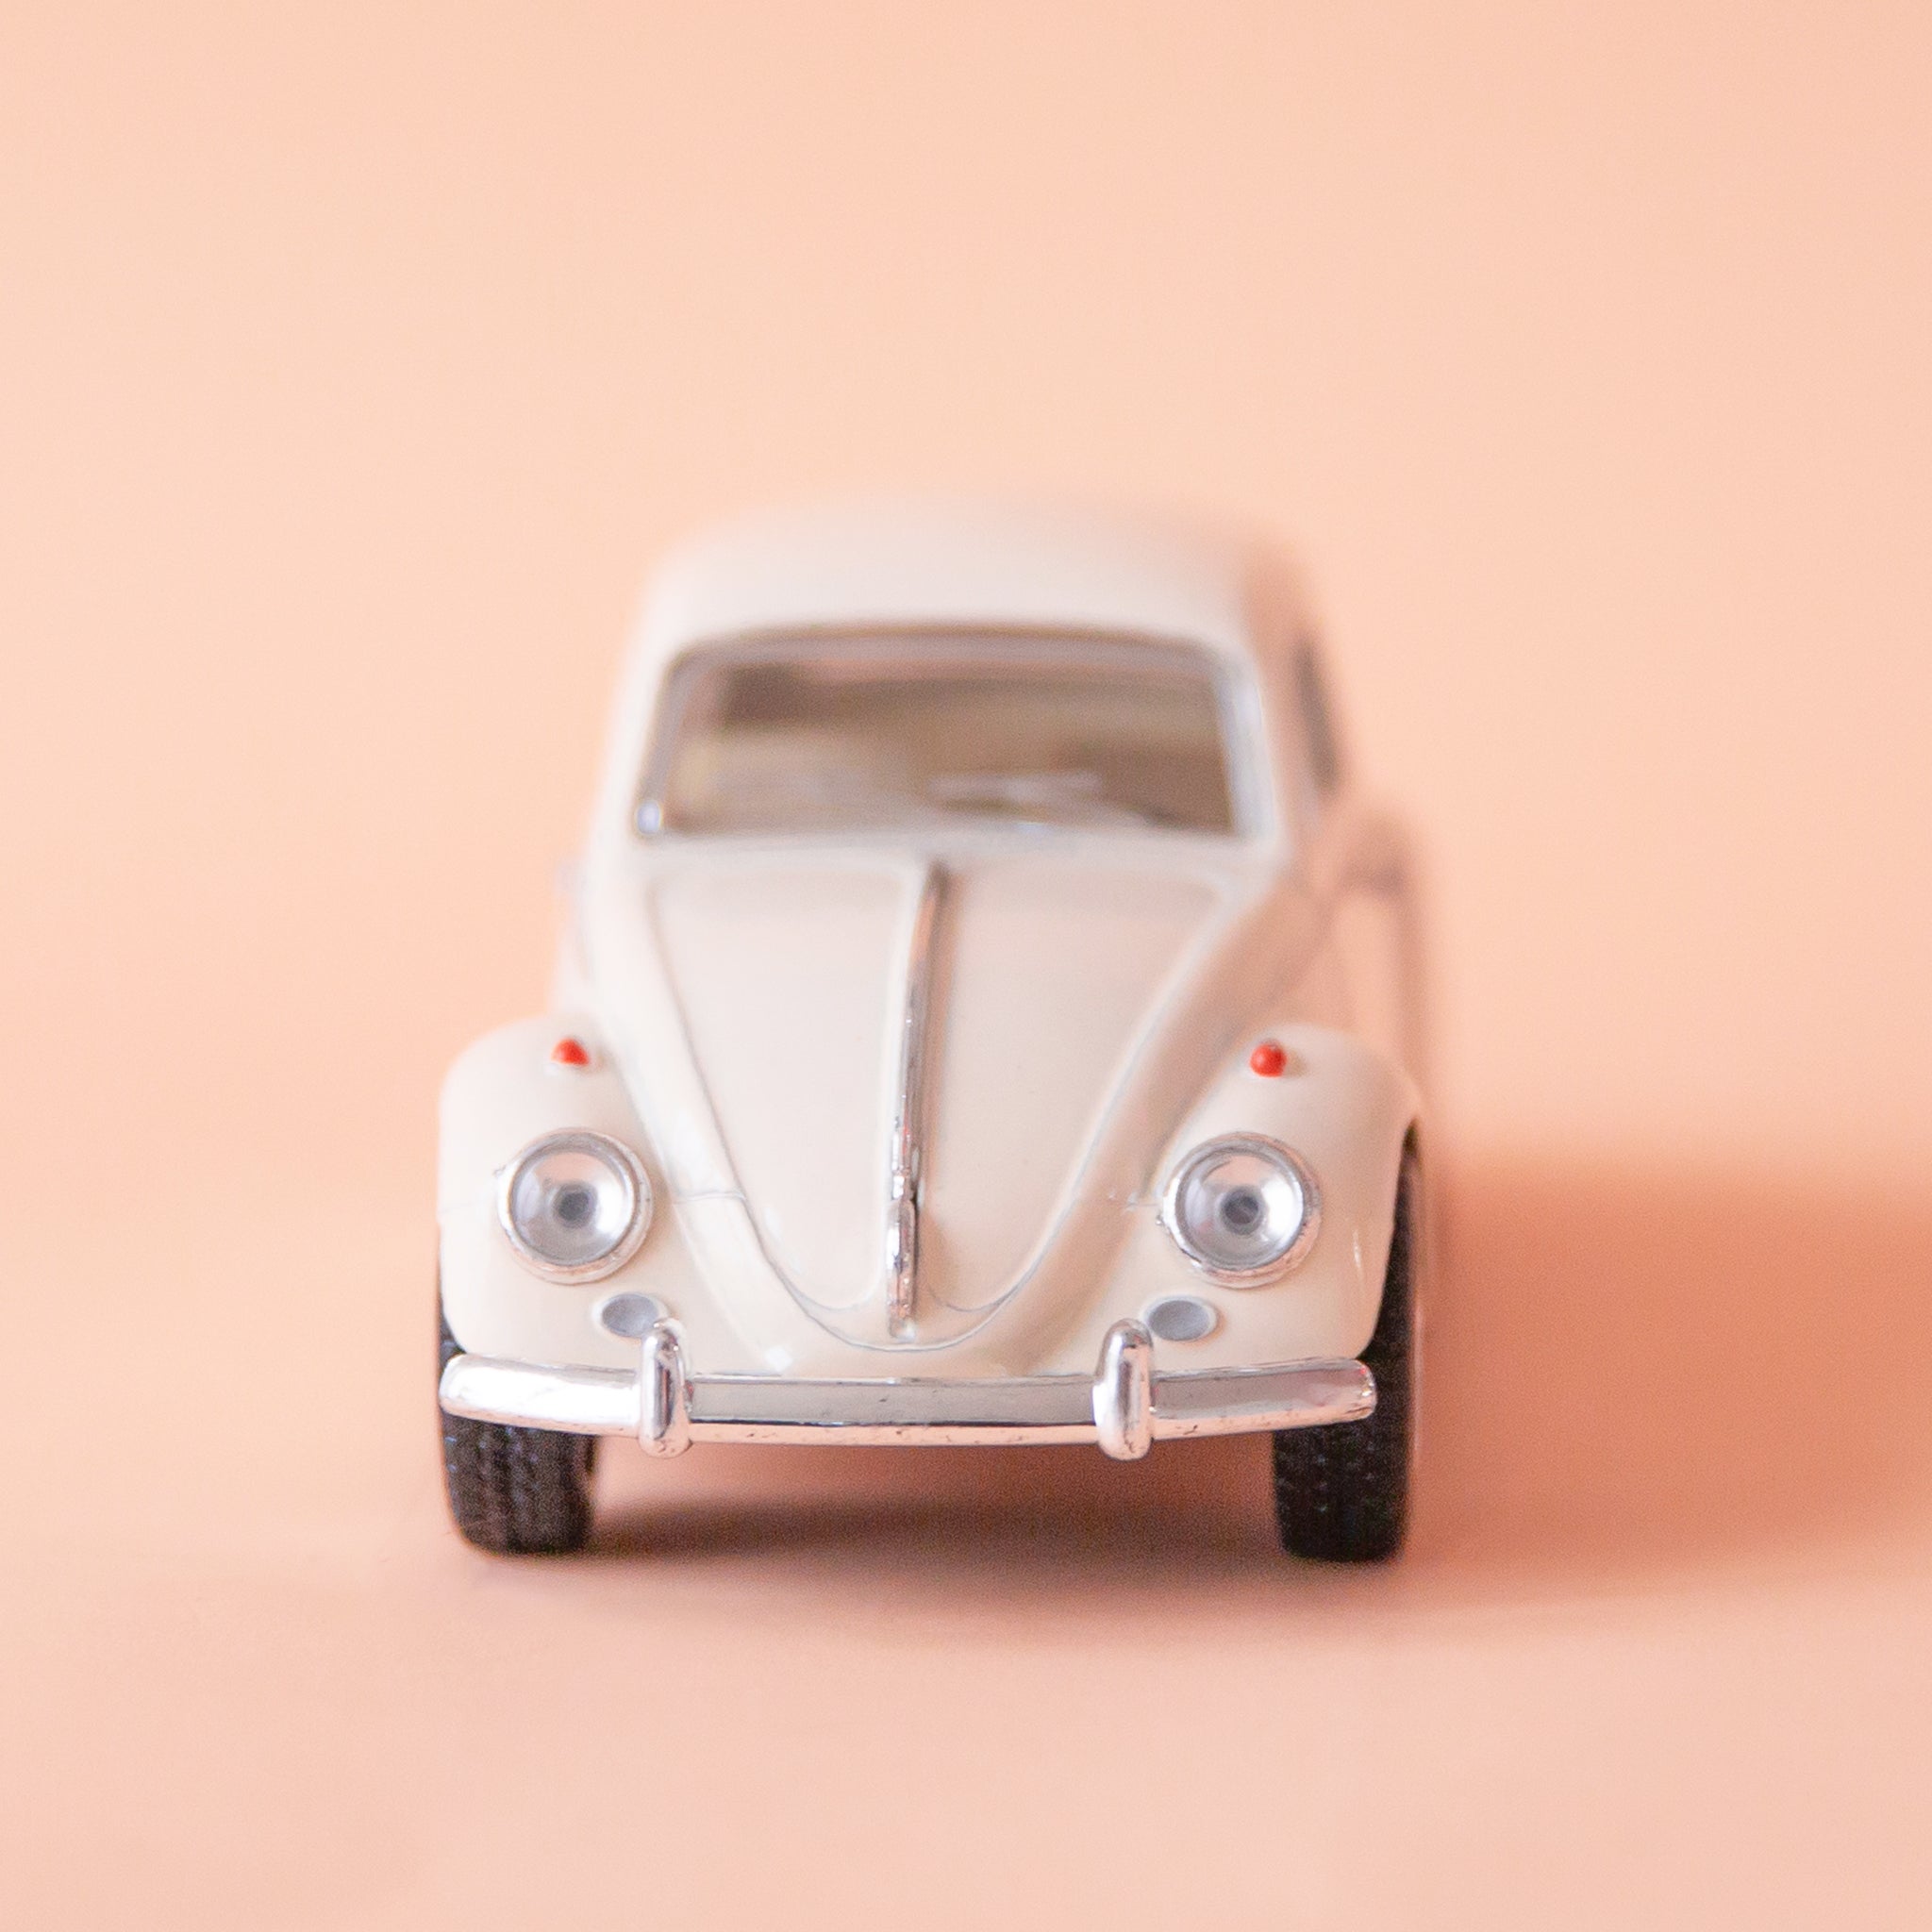 On a tan background is a white beetle toy car.